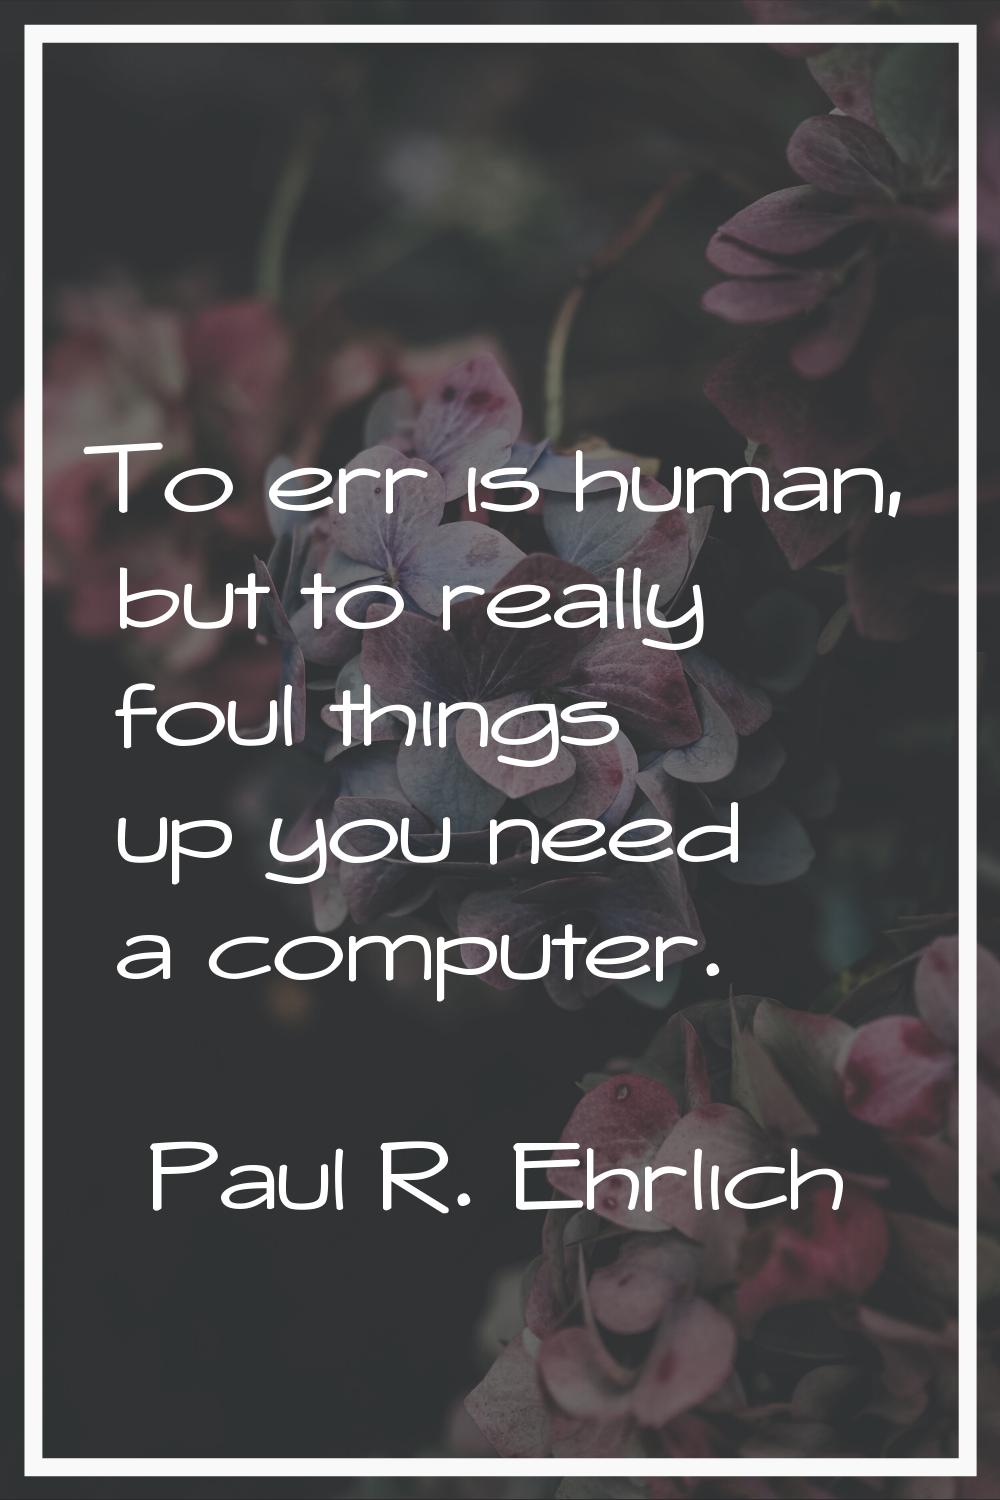 To err is human, but to really foul things up you need a computer.